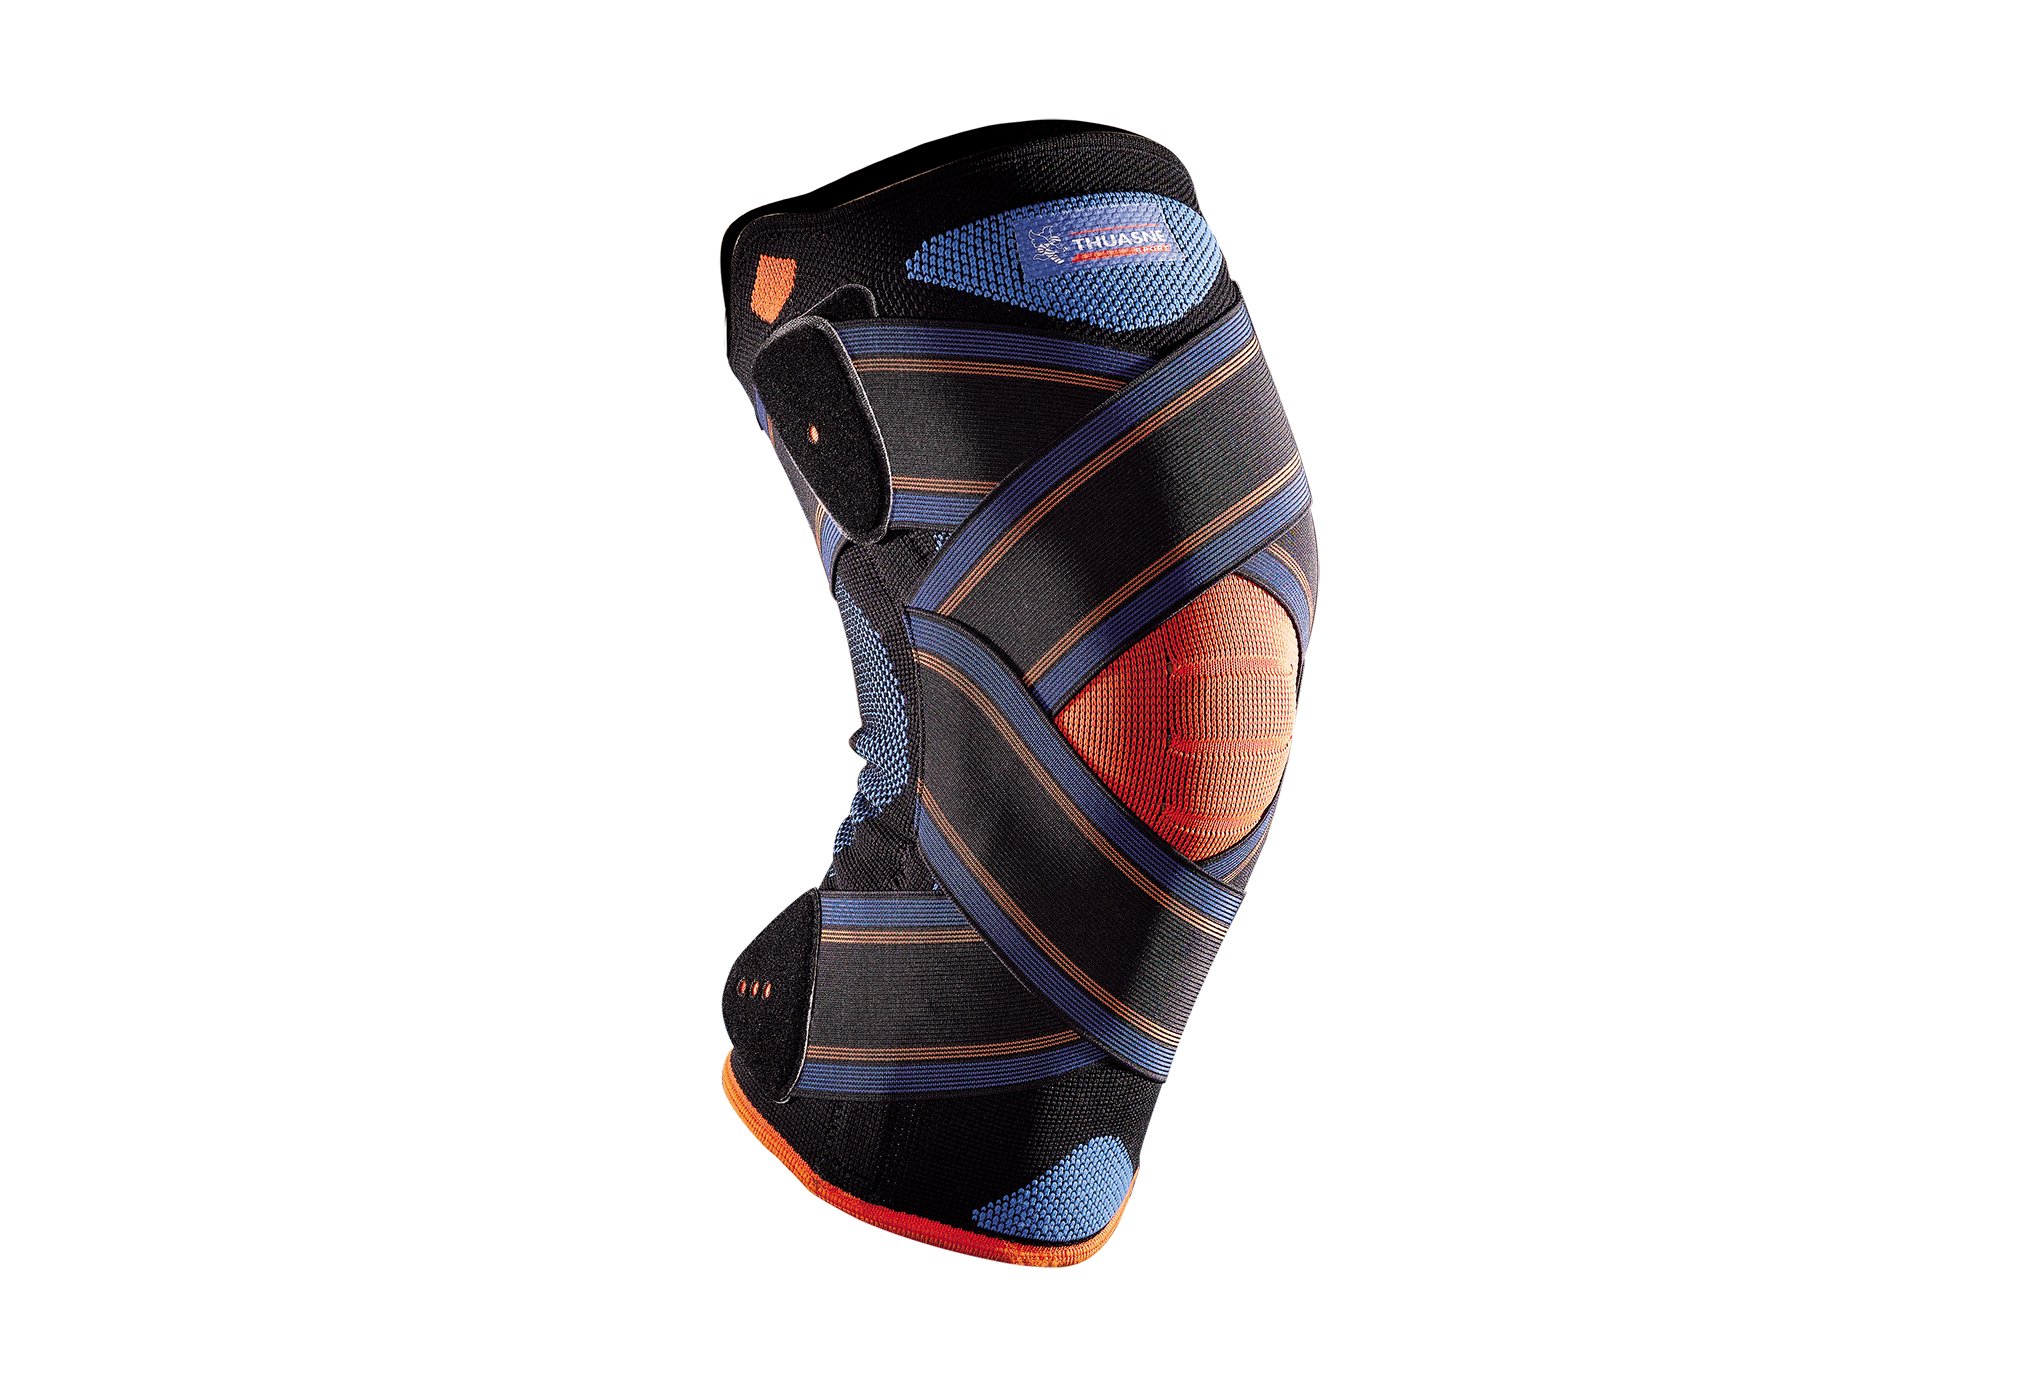 Genouillère ligamentaire renforcée Thuasne Sport - Protections